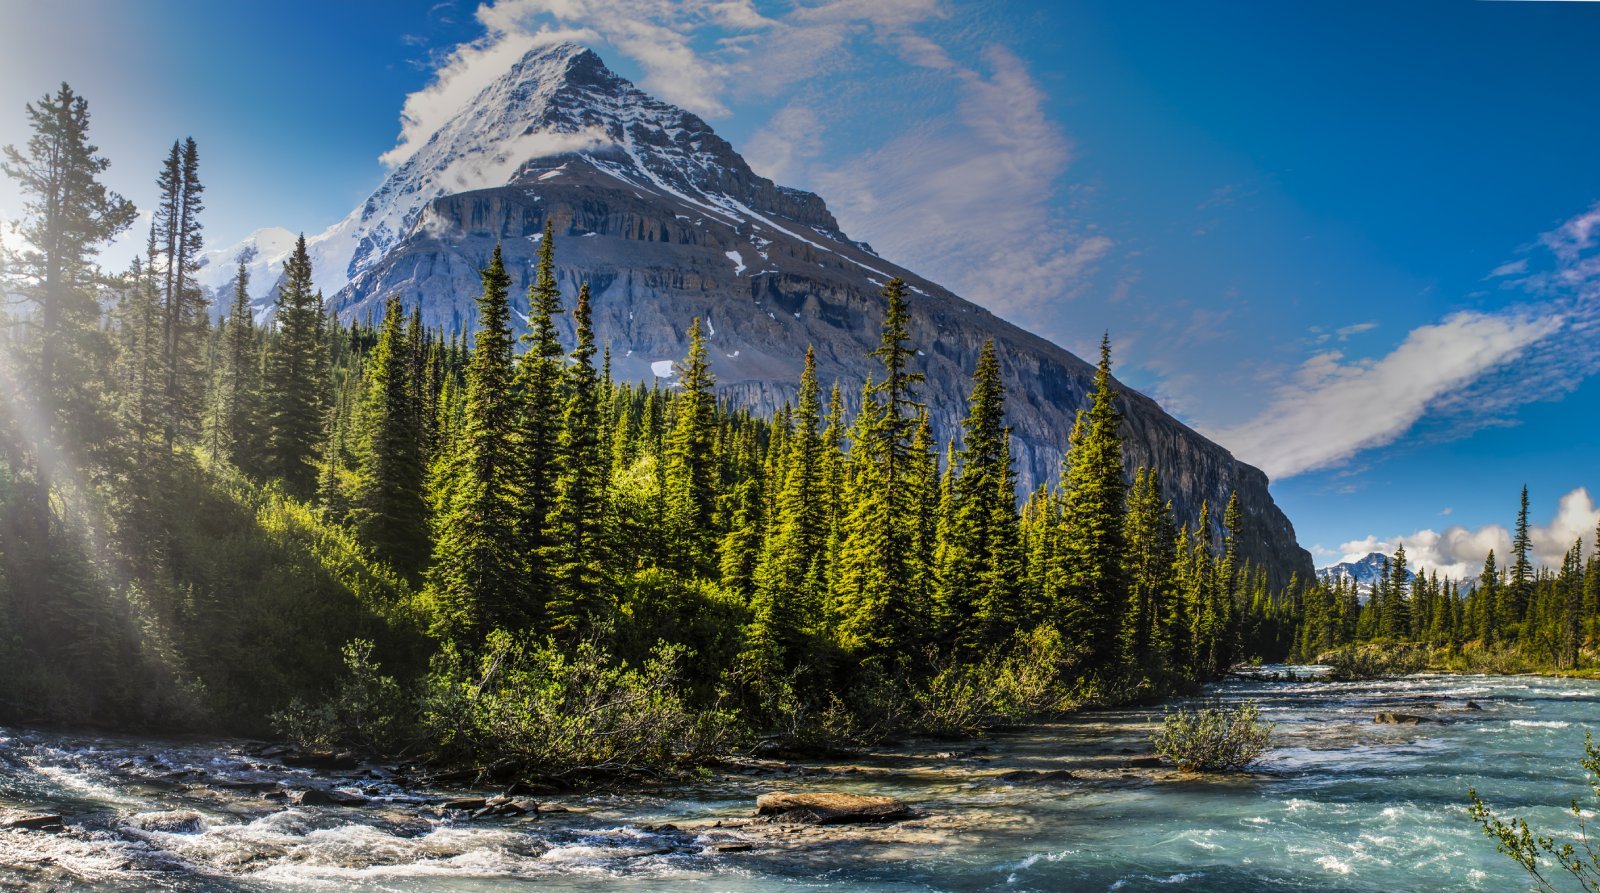 <p class="wp-caption-text">Image Credit: Shutterstock / BGSmith</p>  <p><span>Mount Robson Provincial Park, home to the highest peak in the Canadian Rockies, offers some of the most awe-inspiring scenery in the region. The park is a haven for hikers, with trails ranging from short walks to the challenging Berg Lake Trail, which winds past waterfalls, turquoise lakes, and glaciers. The park’s diverse landscapes are home to various wildlife, including bears, moose, and eagles, making it an excellent spot for wildlife watching.</span></p>